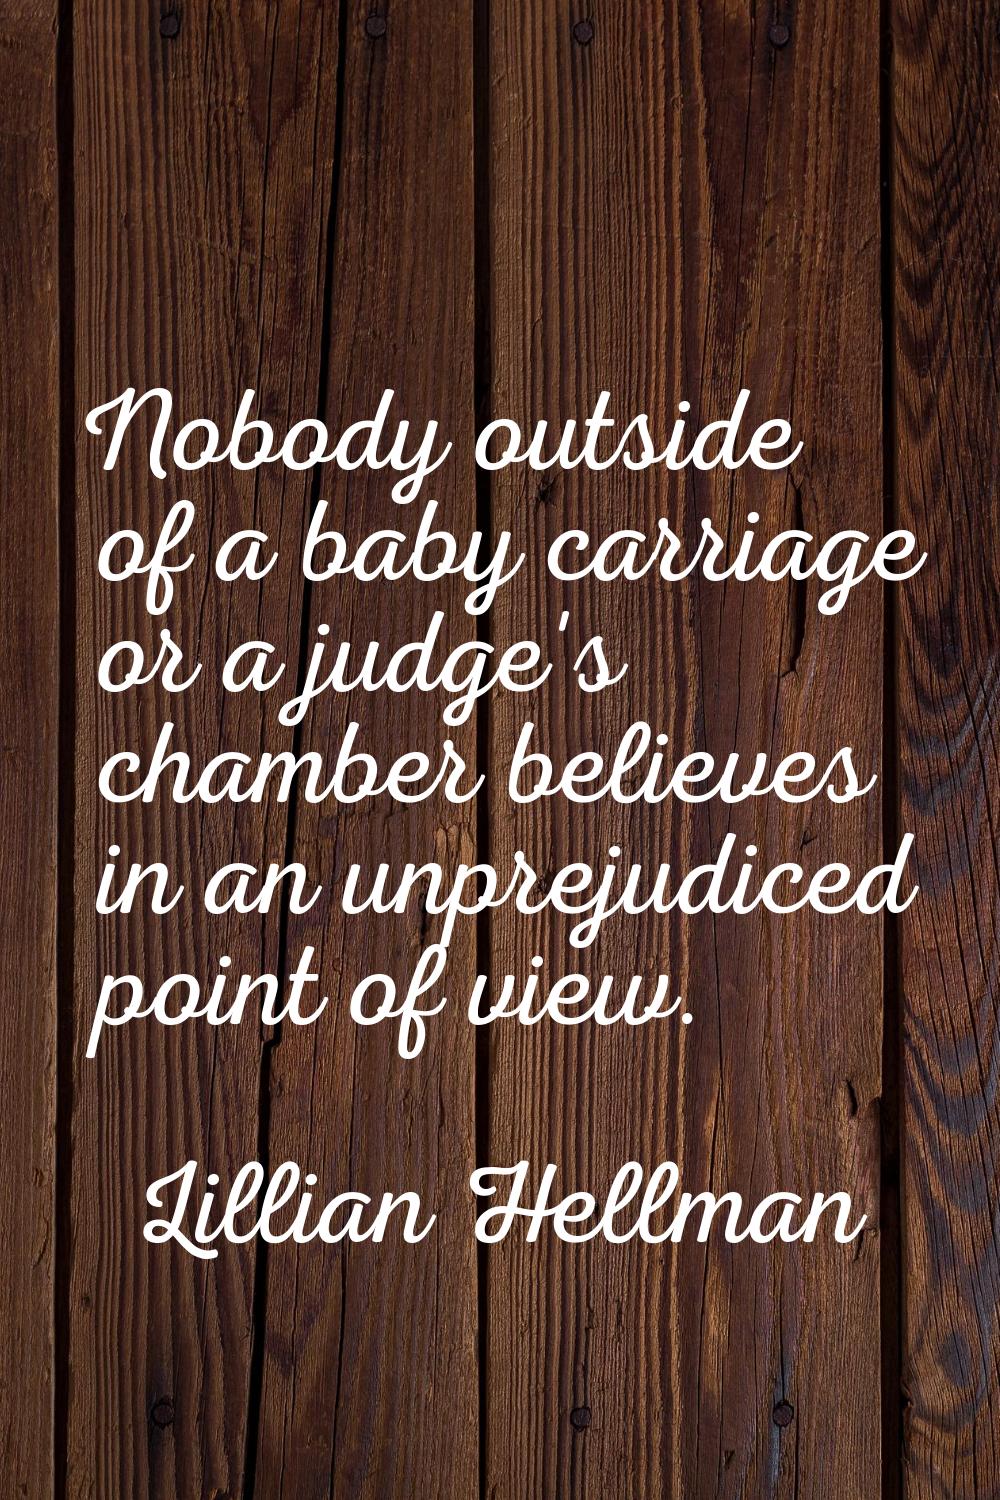 Nobody outside of a baby carriage or a judge's chamber believes in an unprejudiced point of view.